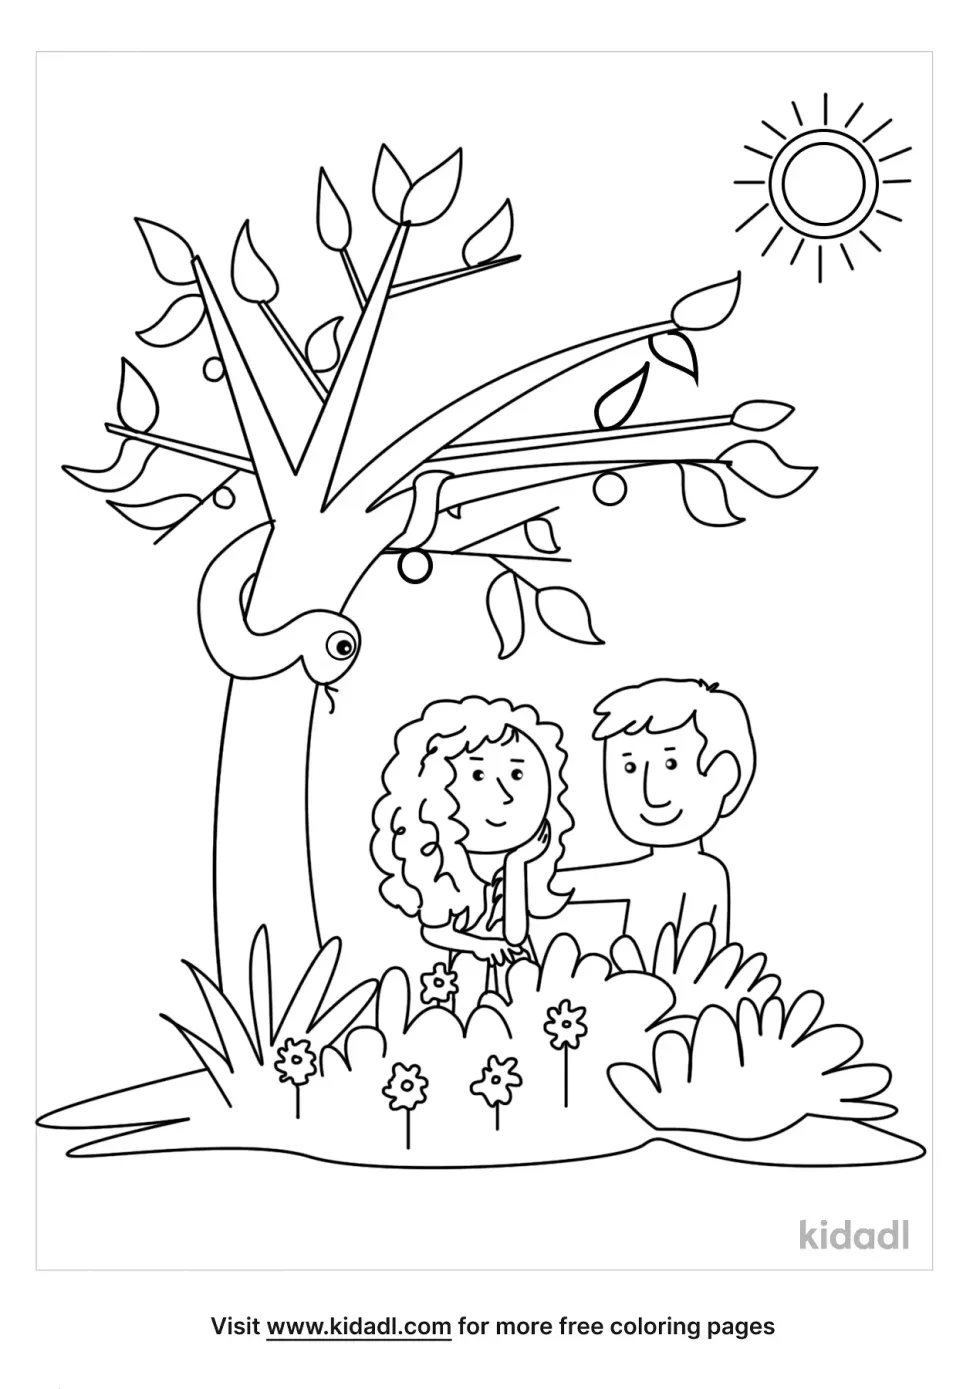 Adam And Eve And The Tree Of Life Coloring Page